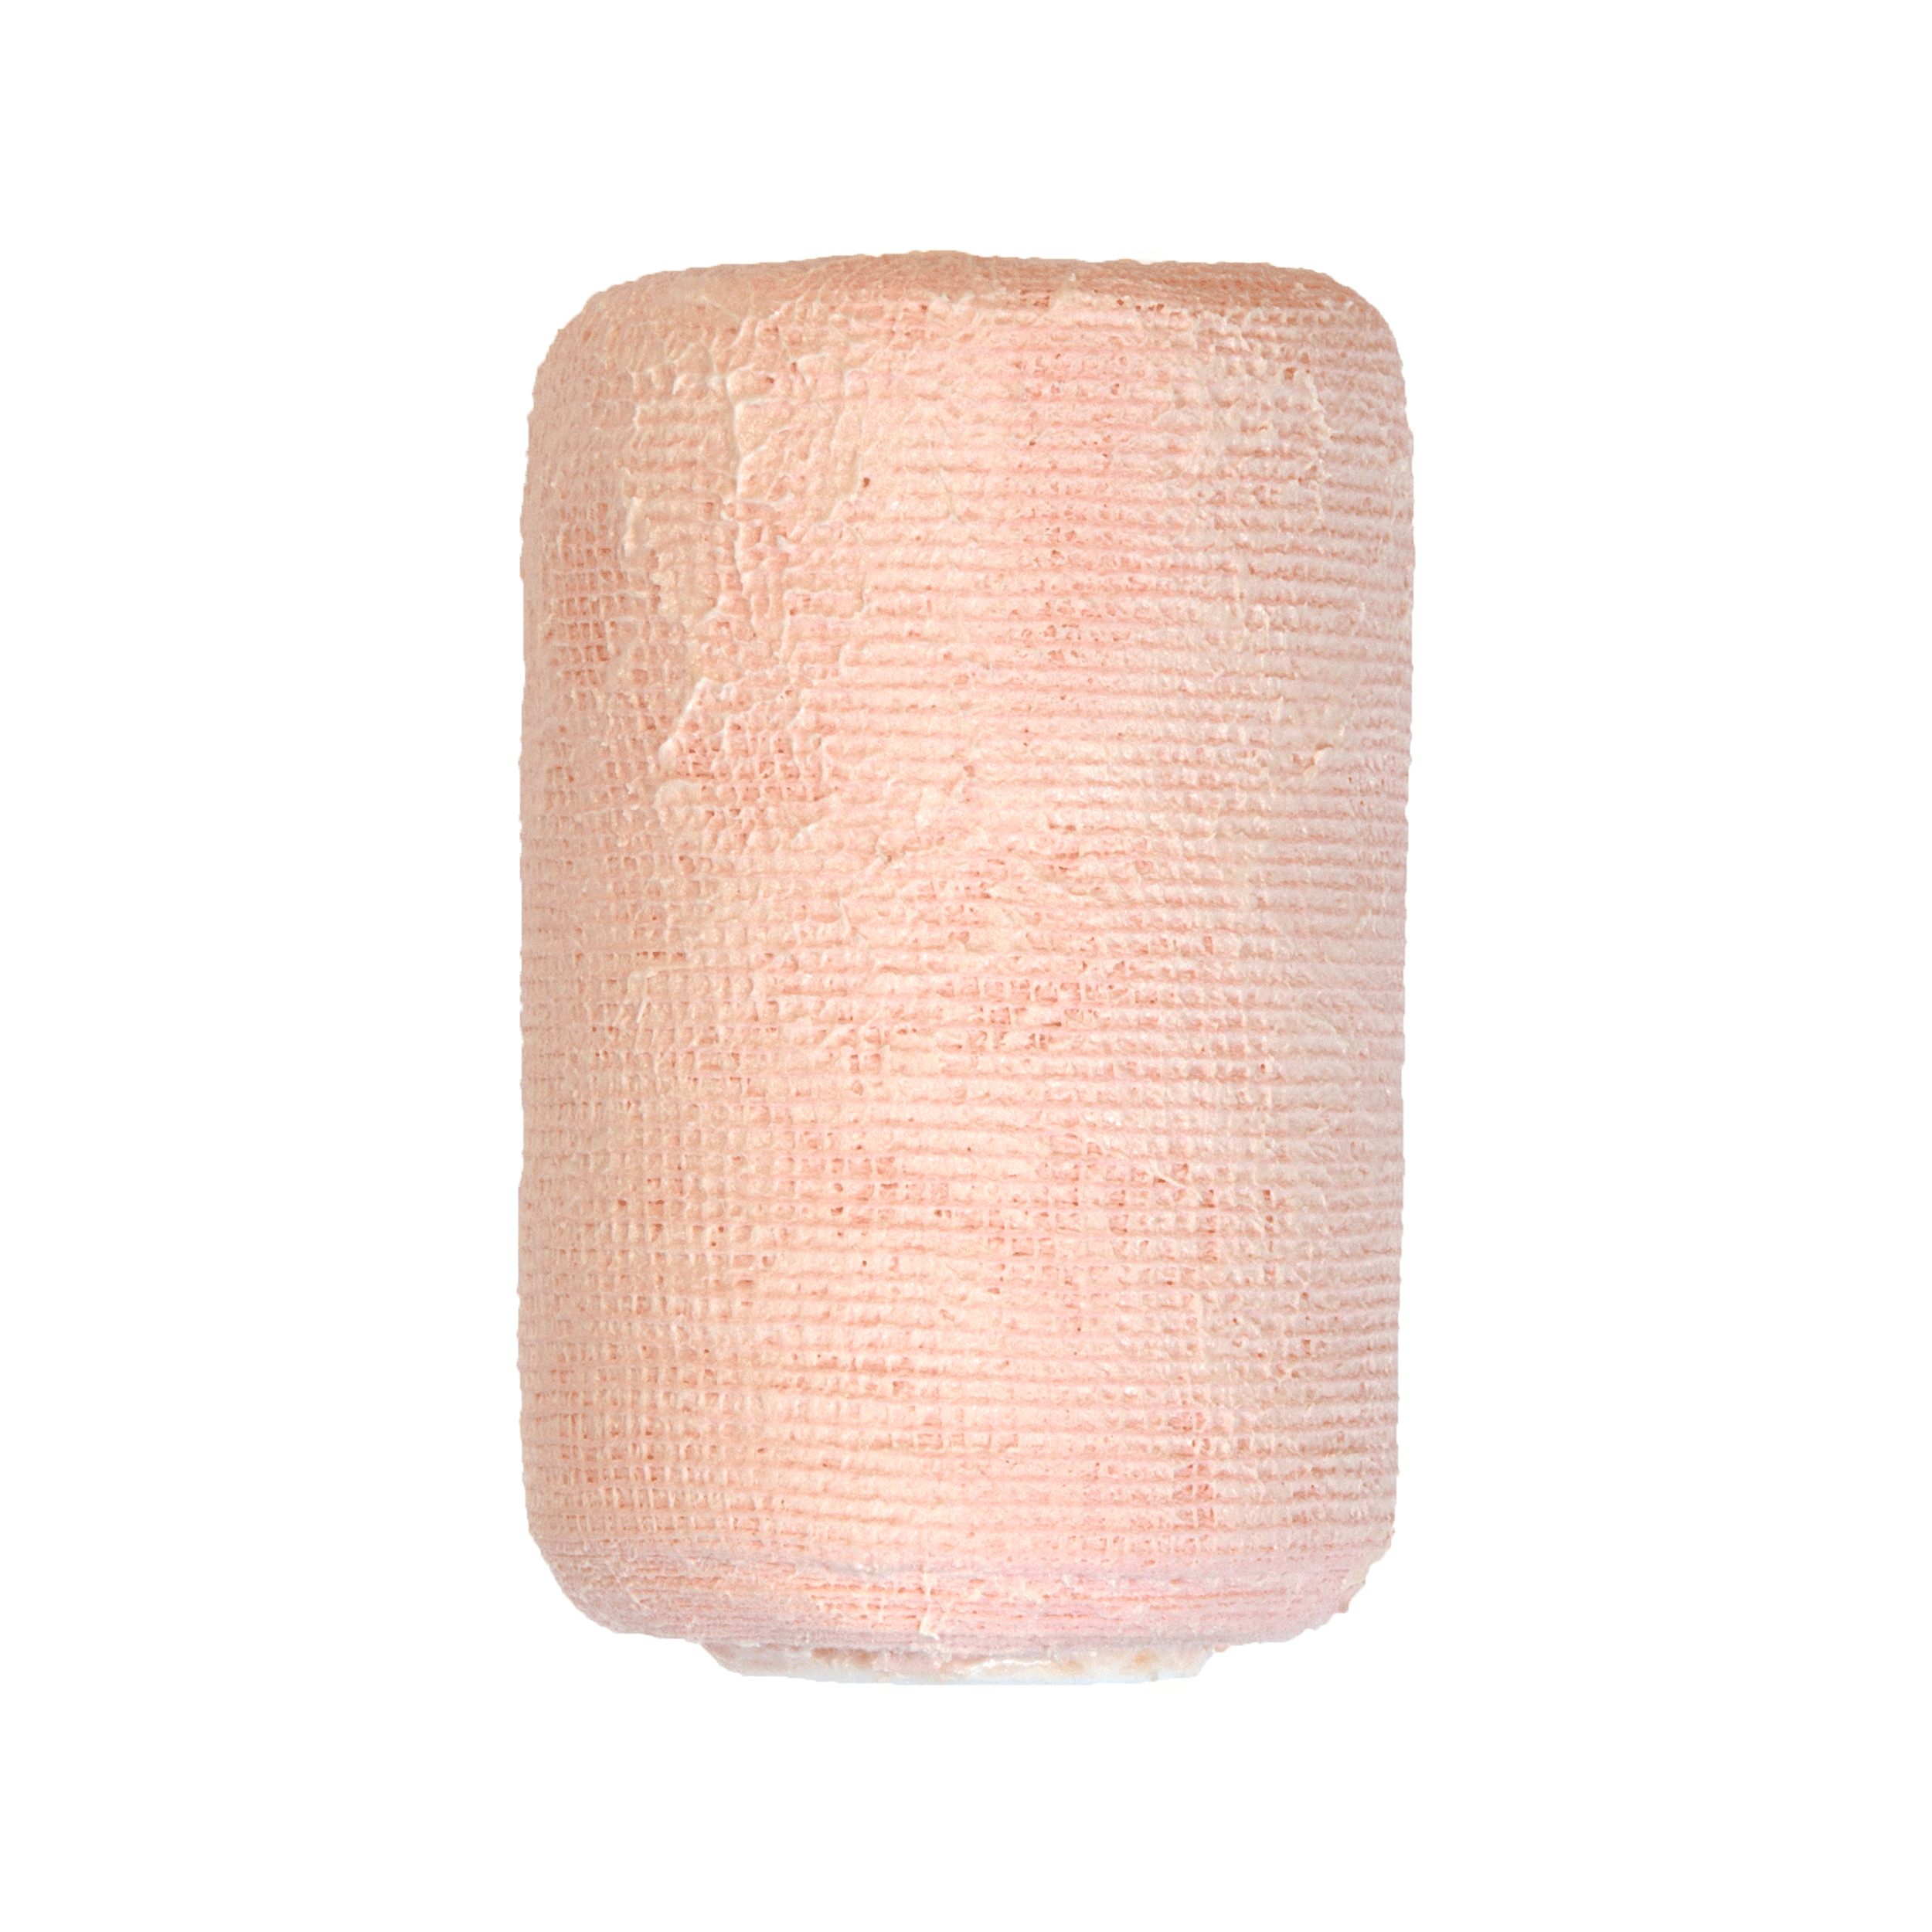 Unna Boot Bandages With Calamine 3in x 10 yds